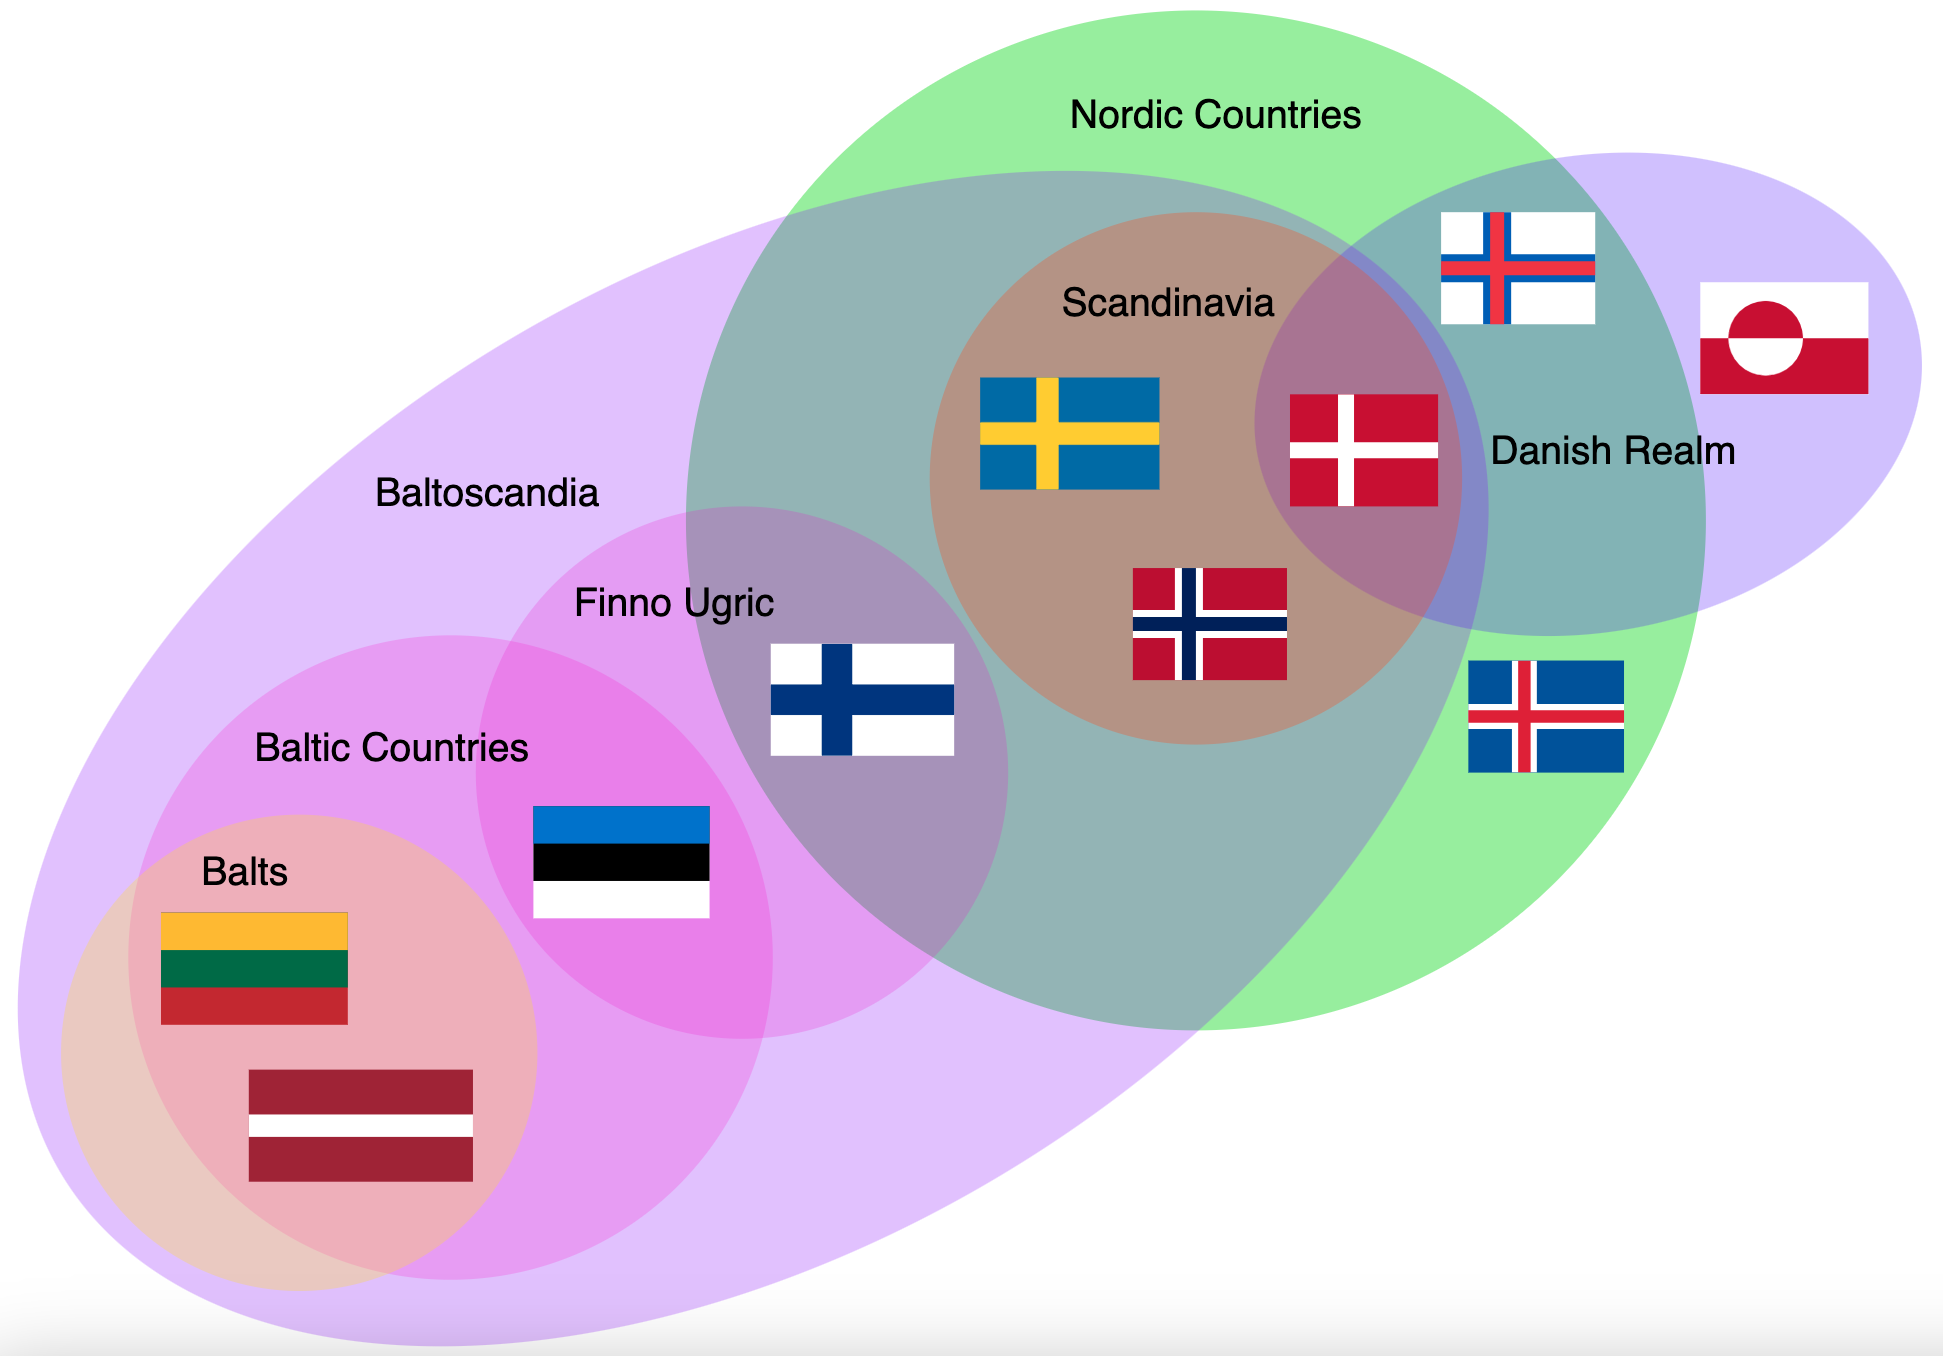 A Venn diagram shows groupings of Nordic countries, Scandinavia, Danish Realm, Baltoscandia, Finno Ugric, Baltic countries, and Balts, with national flags of each country represented.